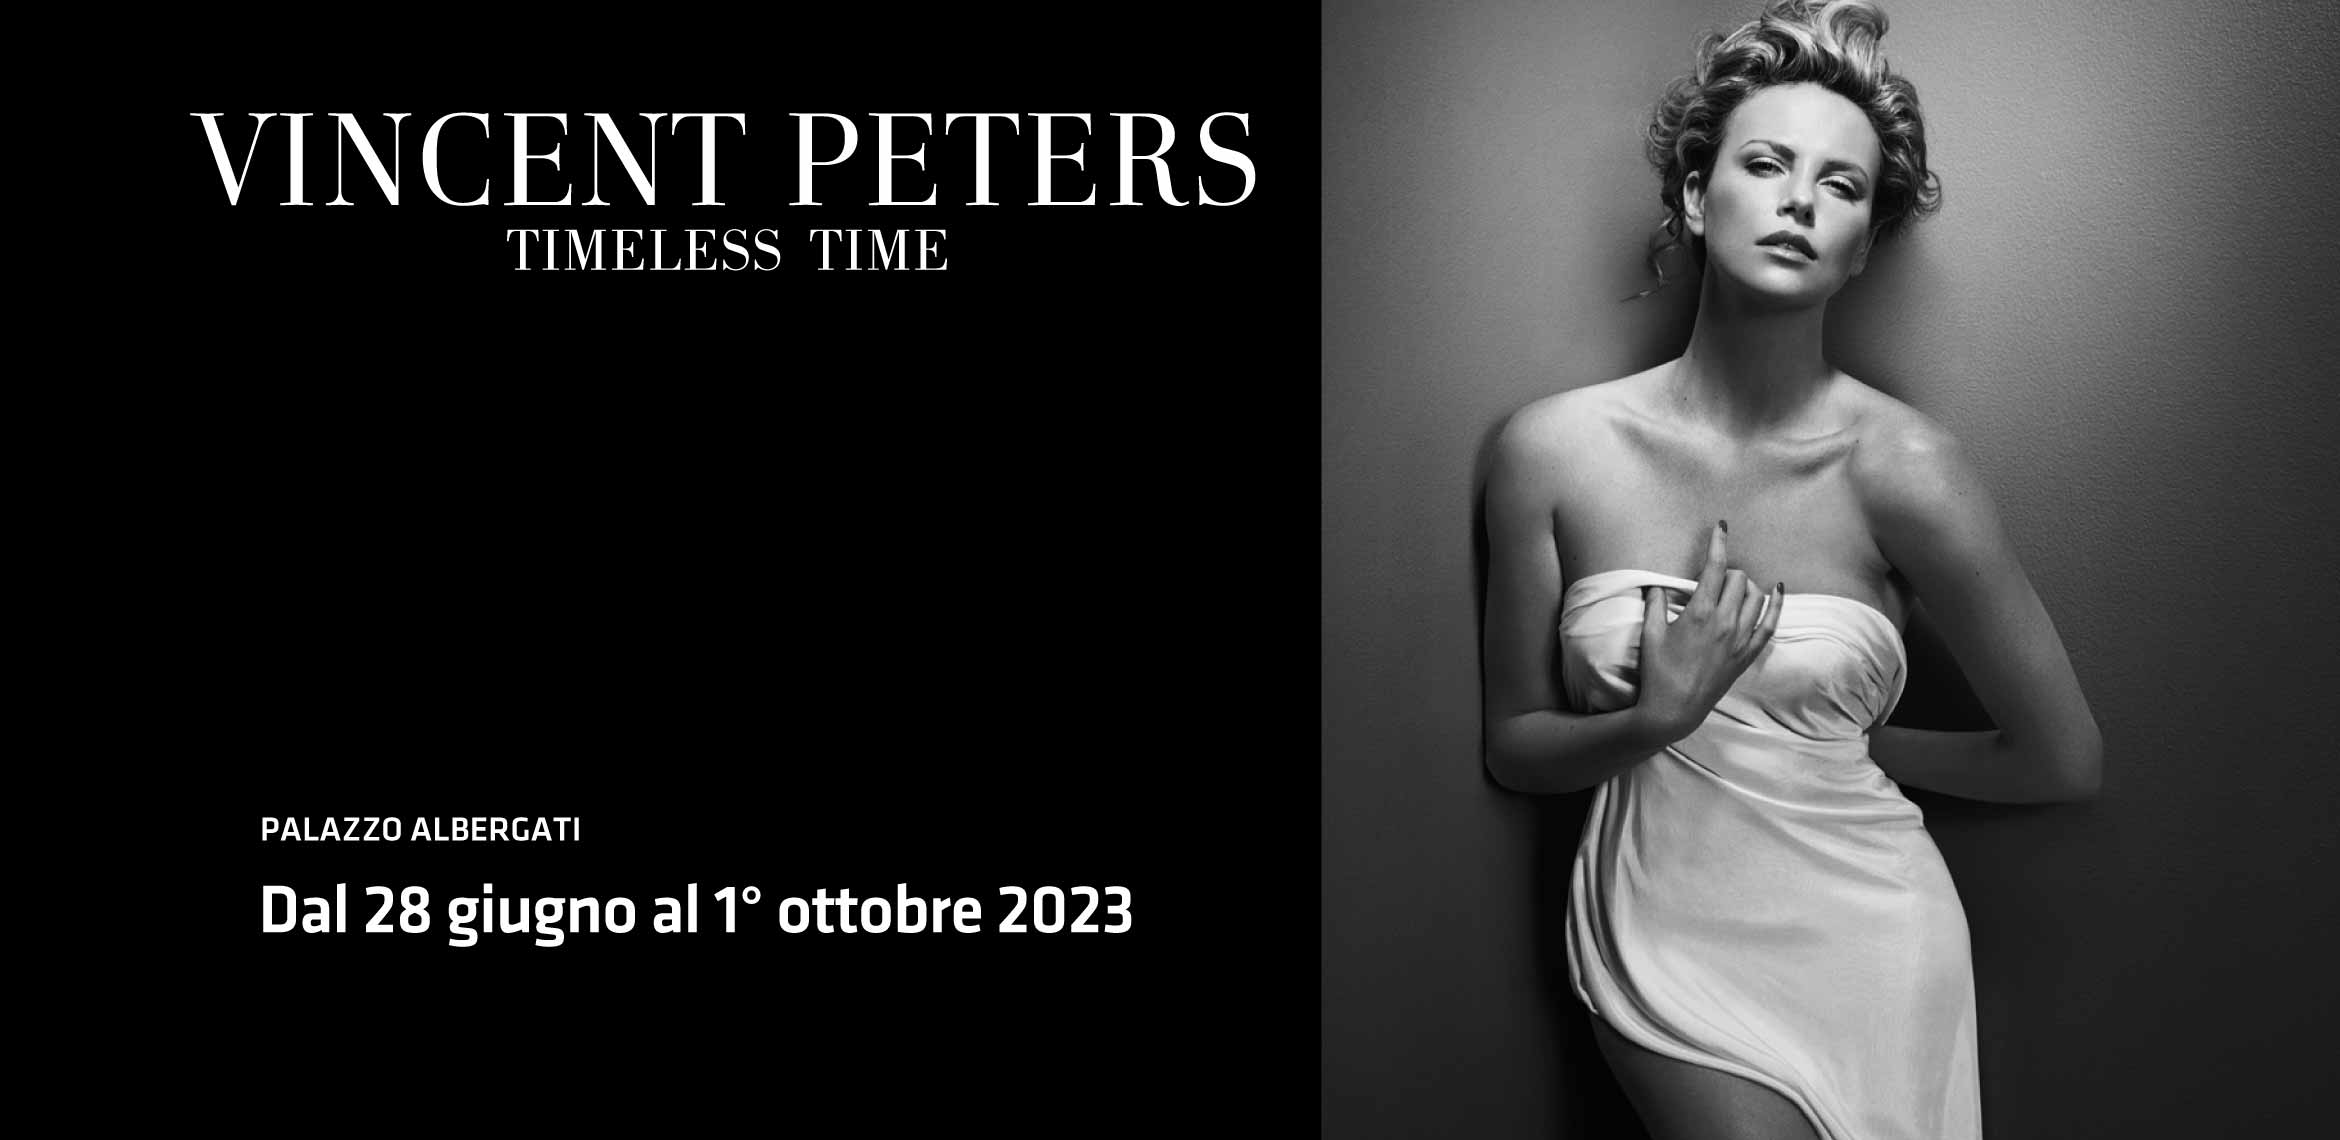 Vincent Peters: Timeless Time